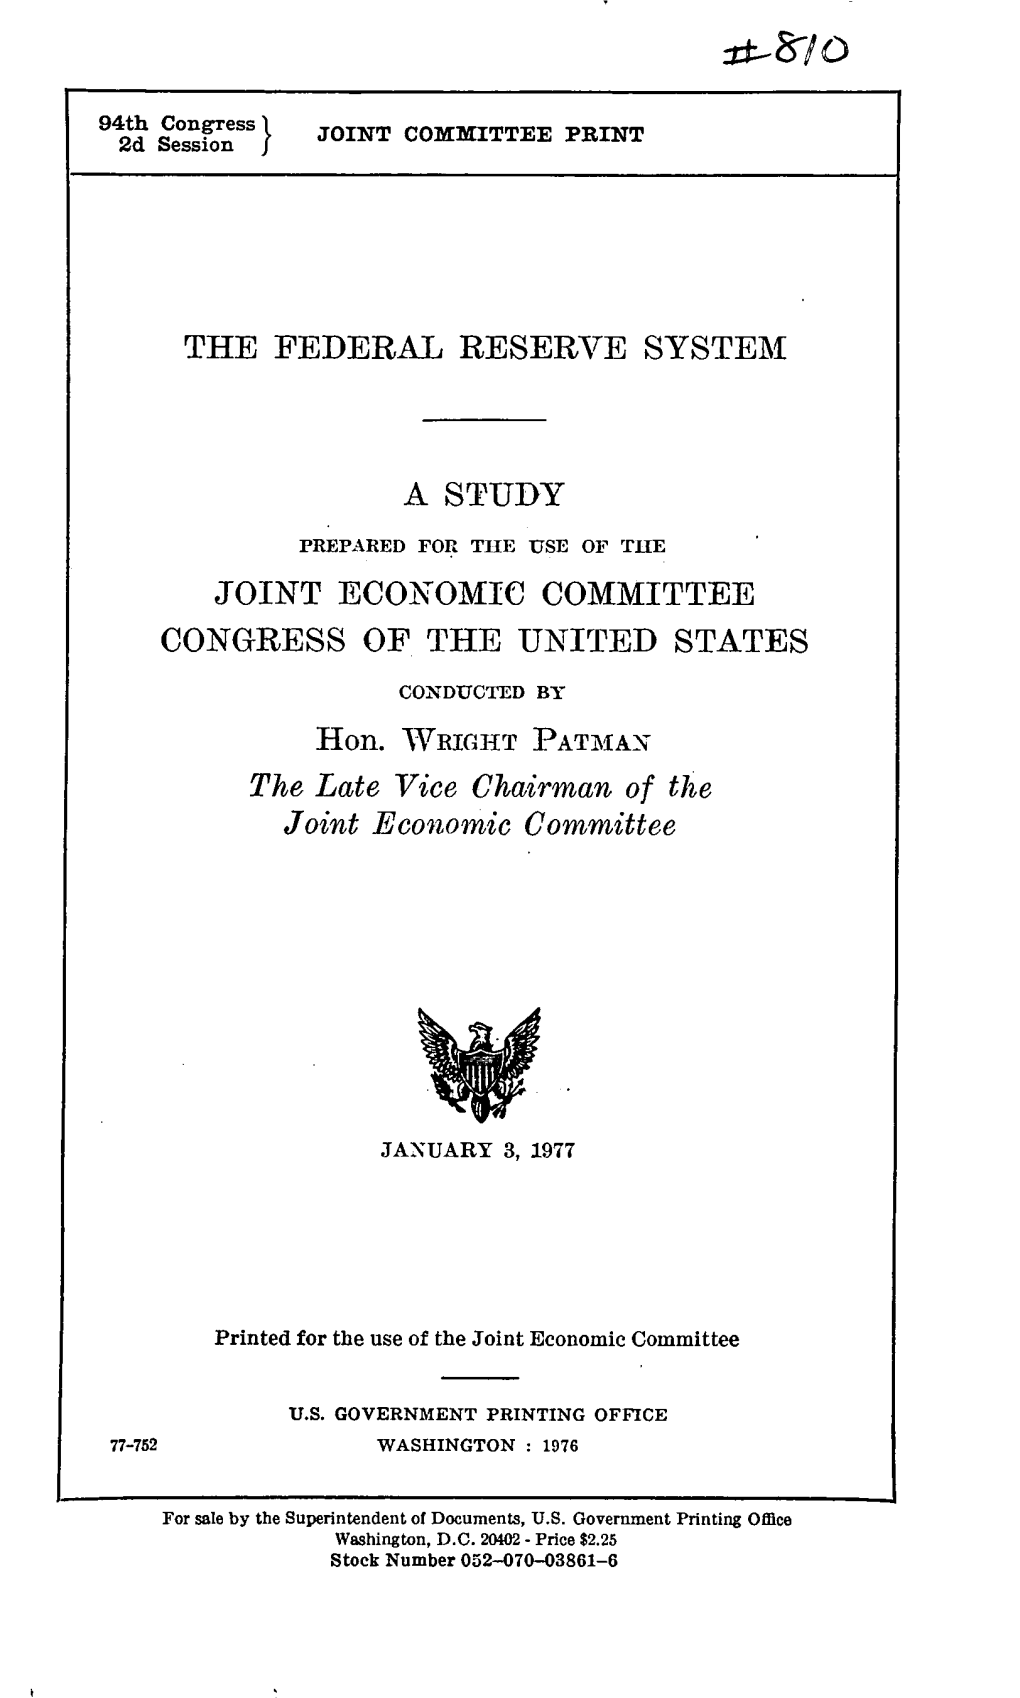 The Federal Reserve System a Study Joint Economic